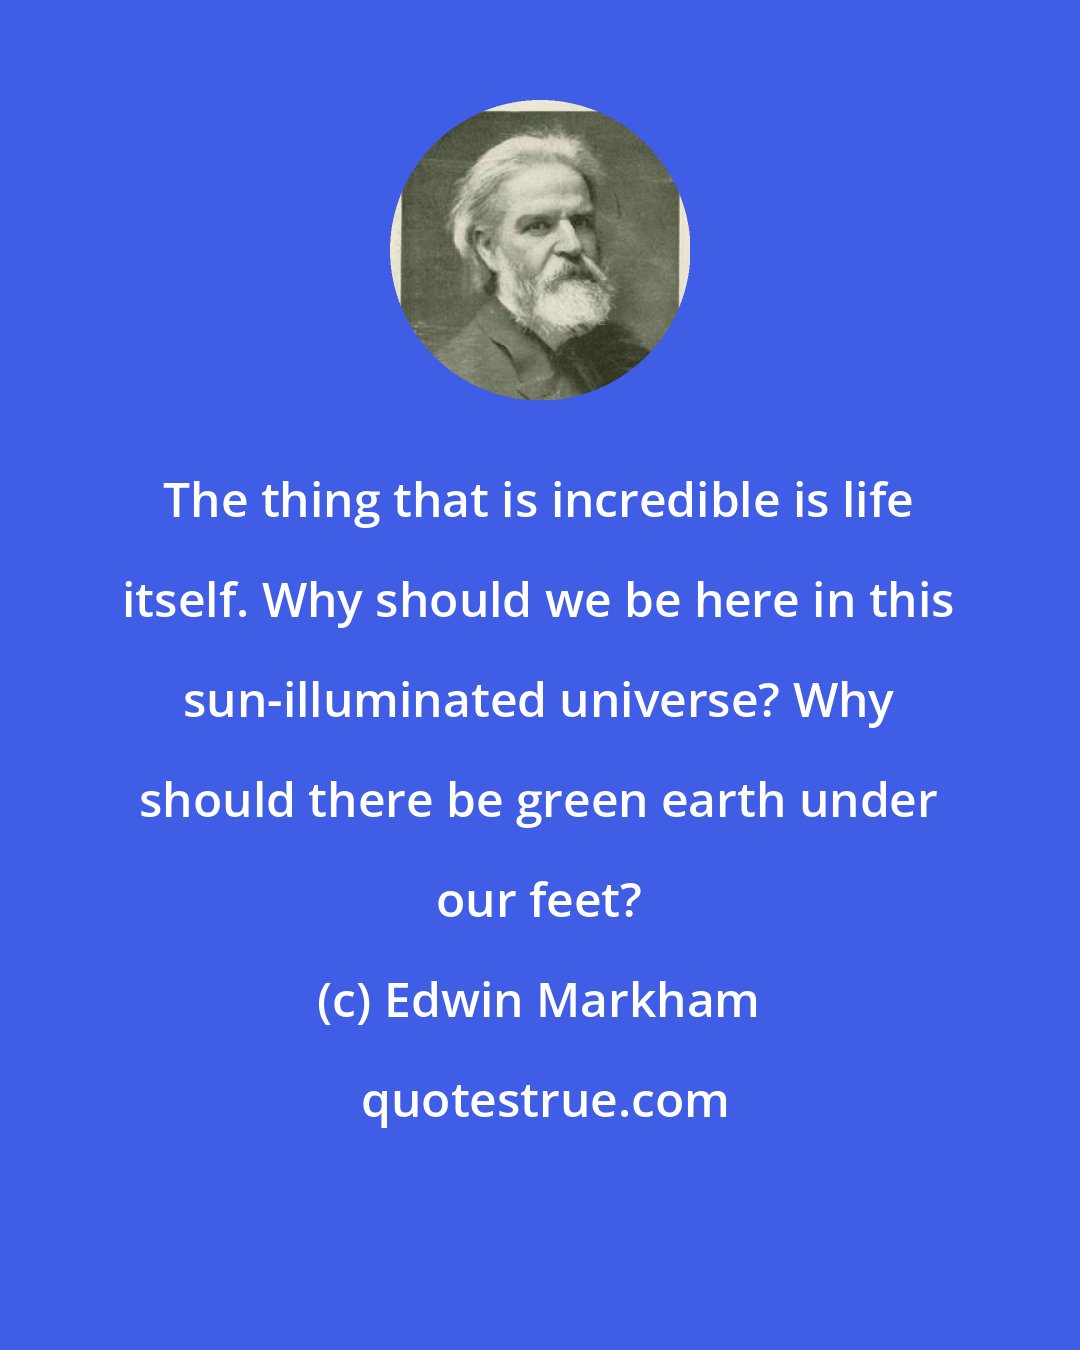 Edwin Markham: The thing that is incredible is life itself. Why should we be here in this sun-illuminated universe? Why should there be green earth under our feet?